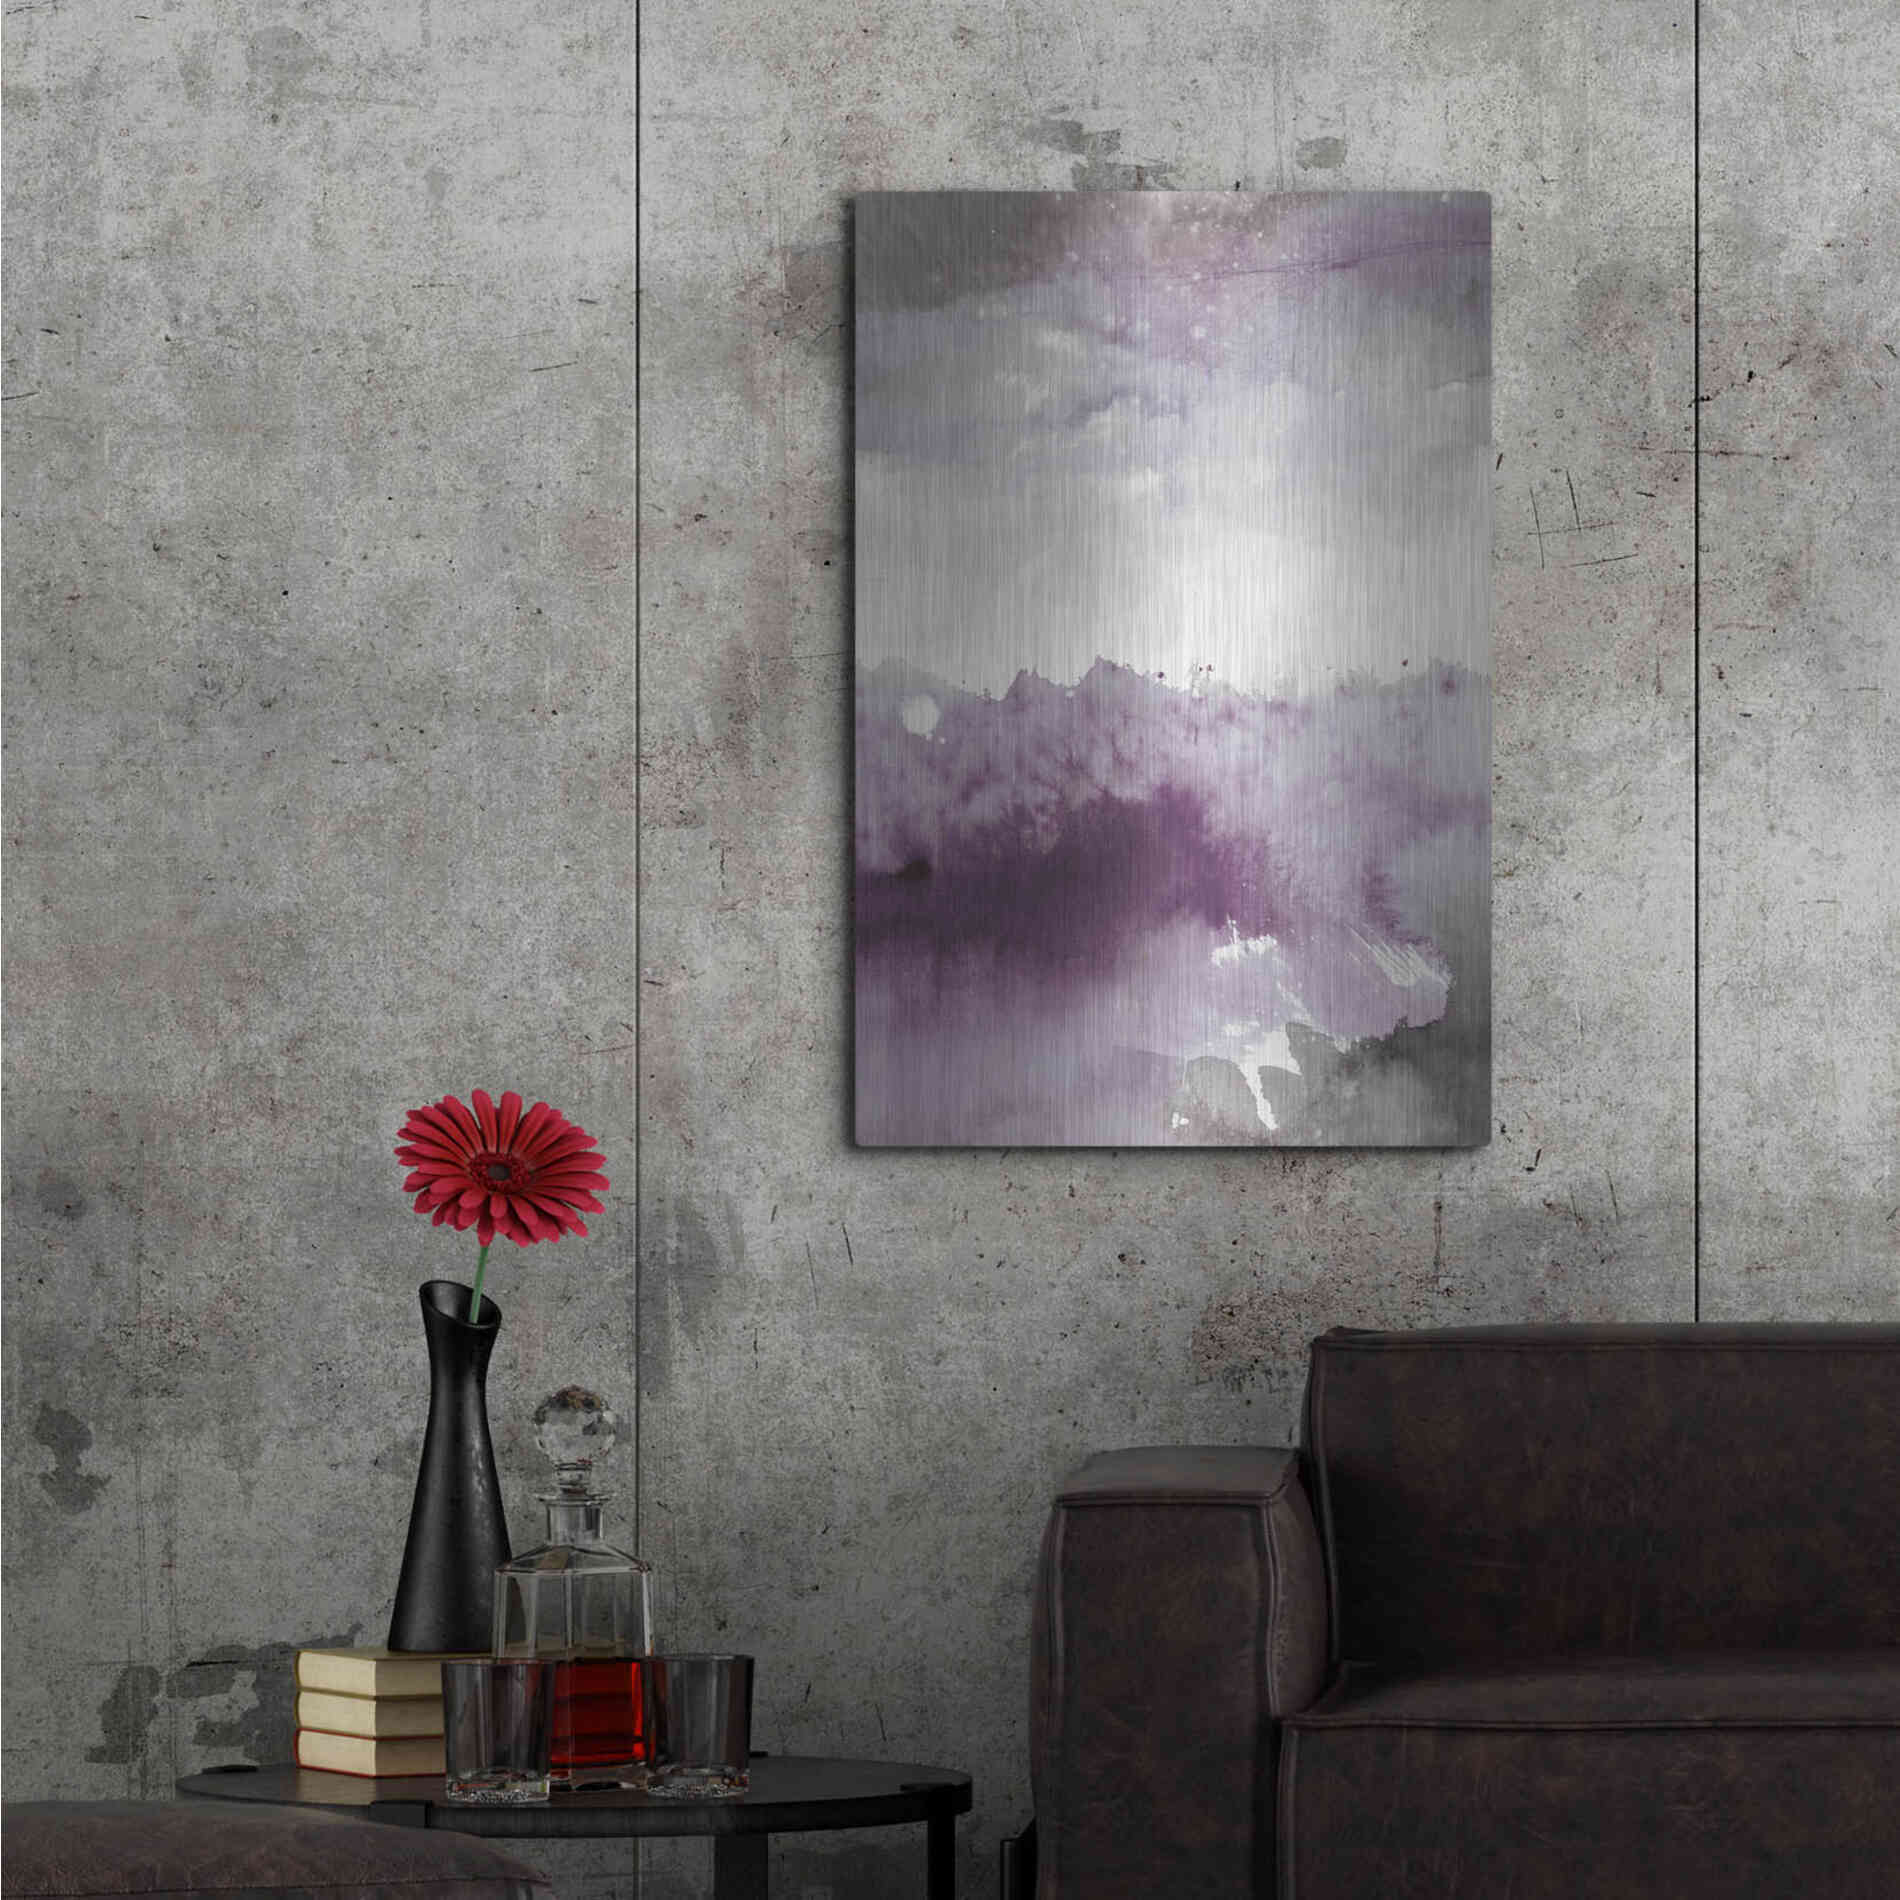 Luxe Metal Art 'Midnight At The Lake II Amethyst Gray Crop' by Mike Schick, Metal Wall Art,24x36